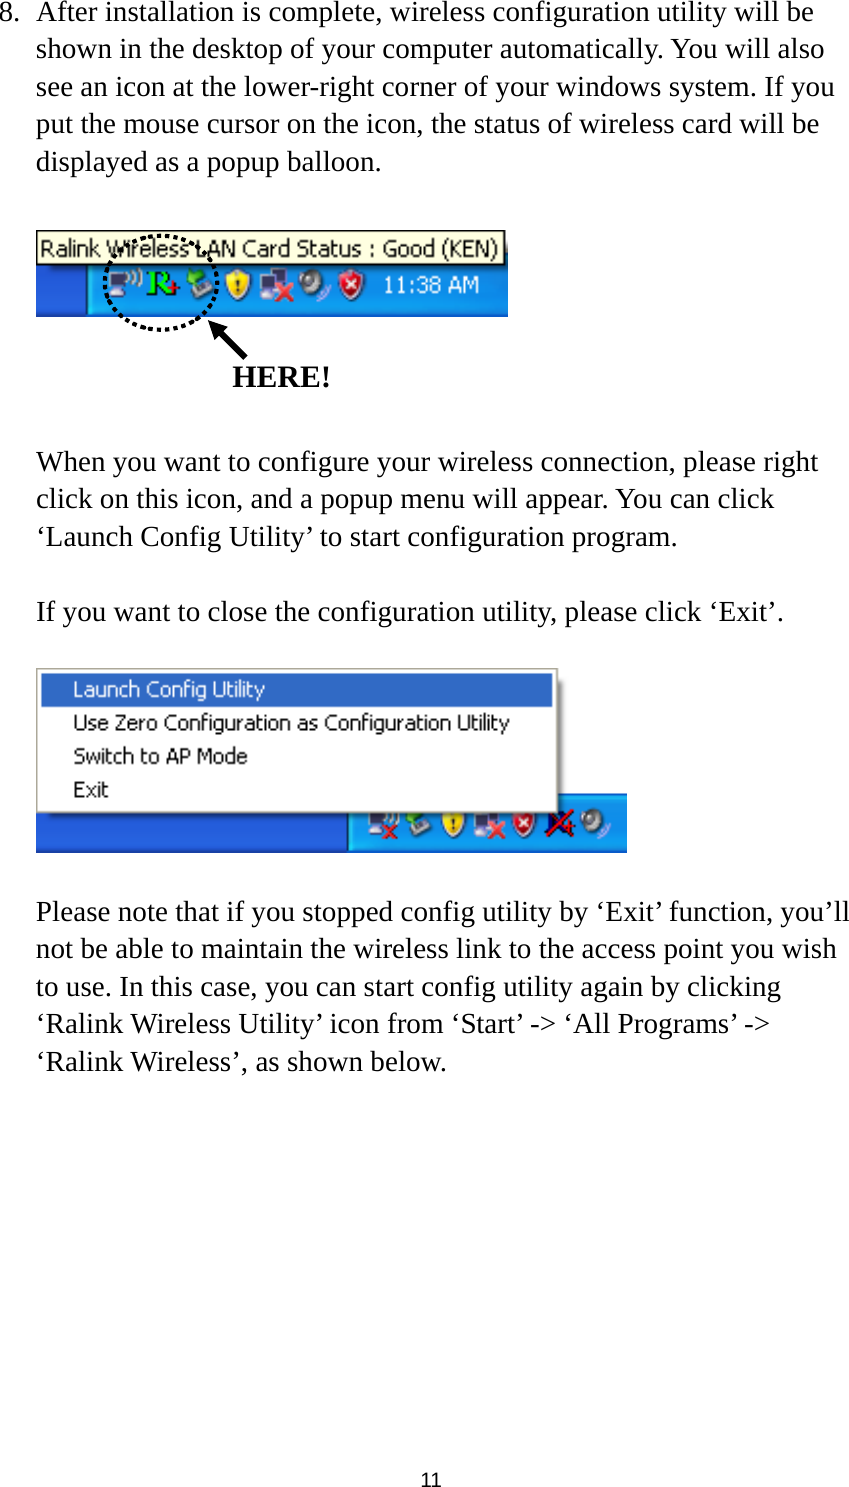  11 8. After installation is complete, wireless configuration utility will be shown in the desktop of your computer automatically. You will also see an icon at the lower-right corner of your windows system. If you put the mouse cursor on the icon, the status of wireless card will be displayed as a popup balloon.      When you want to configure your wireless connection, please right click on this icon, and a popup menu will appear. You can click ‘Launch Config Utility’ to start configuration program.  If you want to close the configuration utility, please click ‘Exit’.    Please note that if you stopped config utility by ‘Exit’ function, you’ll not be able to maintain the wireless link to the access point you wish to use. In this case, you can start config utility again by clicking ‘Ralink Wireless Utility’ icon from ‘Start’ -&gt; ‘All Programs’ -&gt; ‘Ralink Wireless’, as shown below.   HERE!